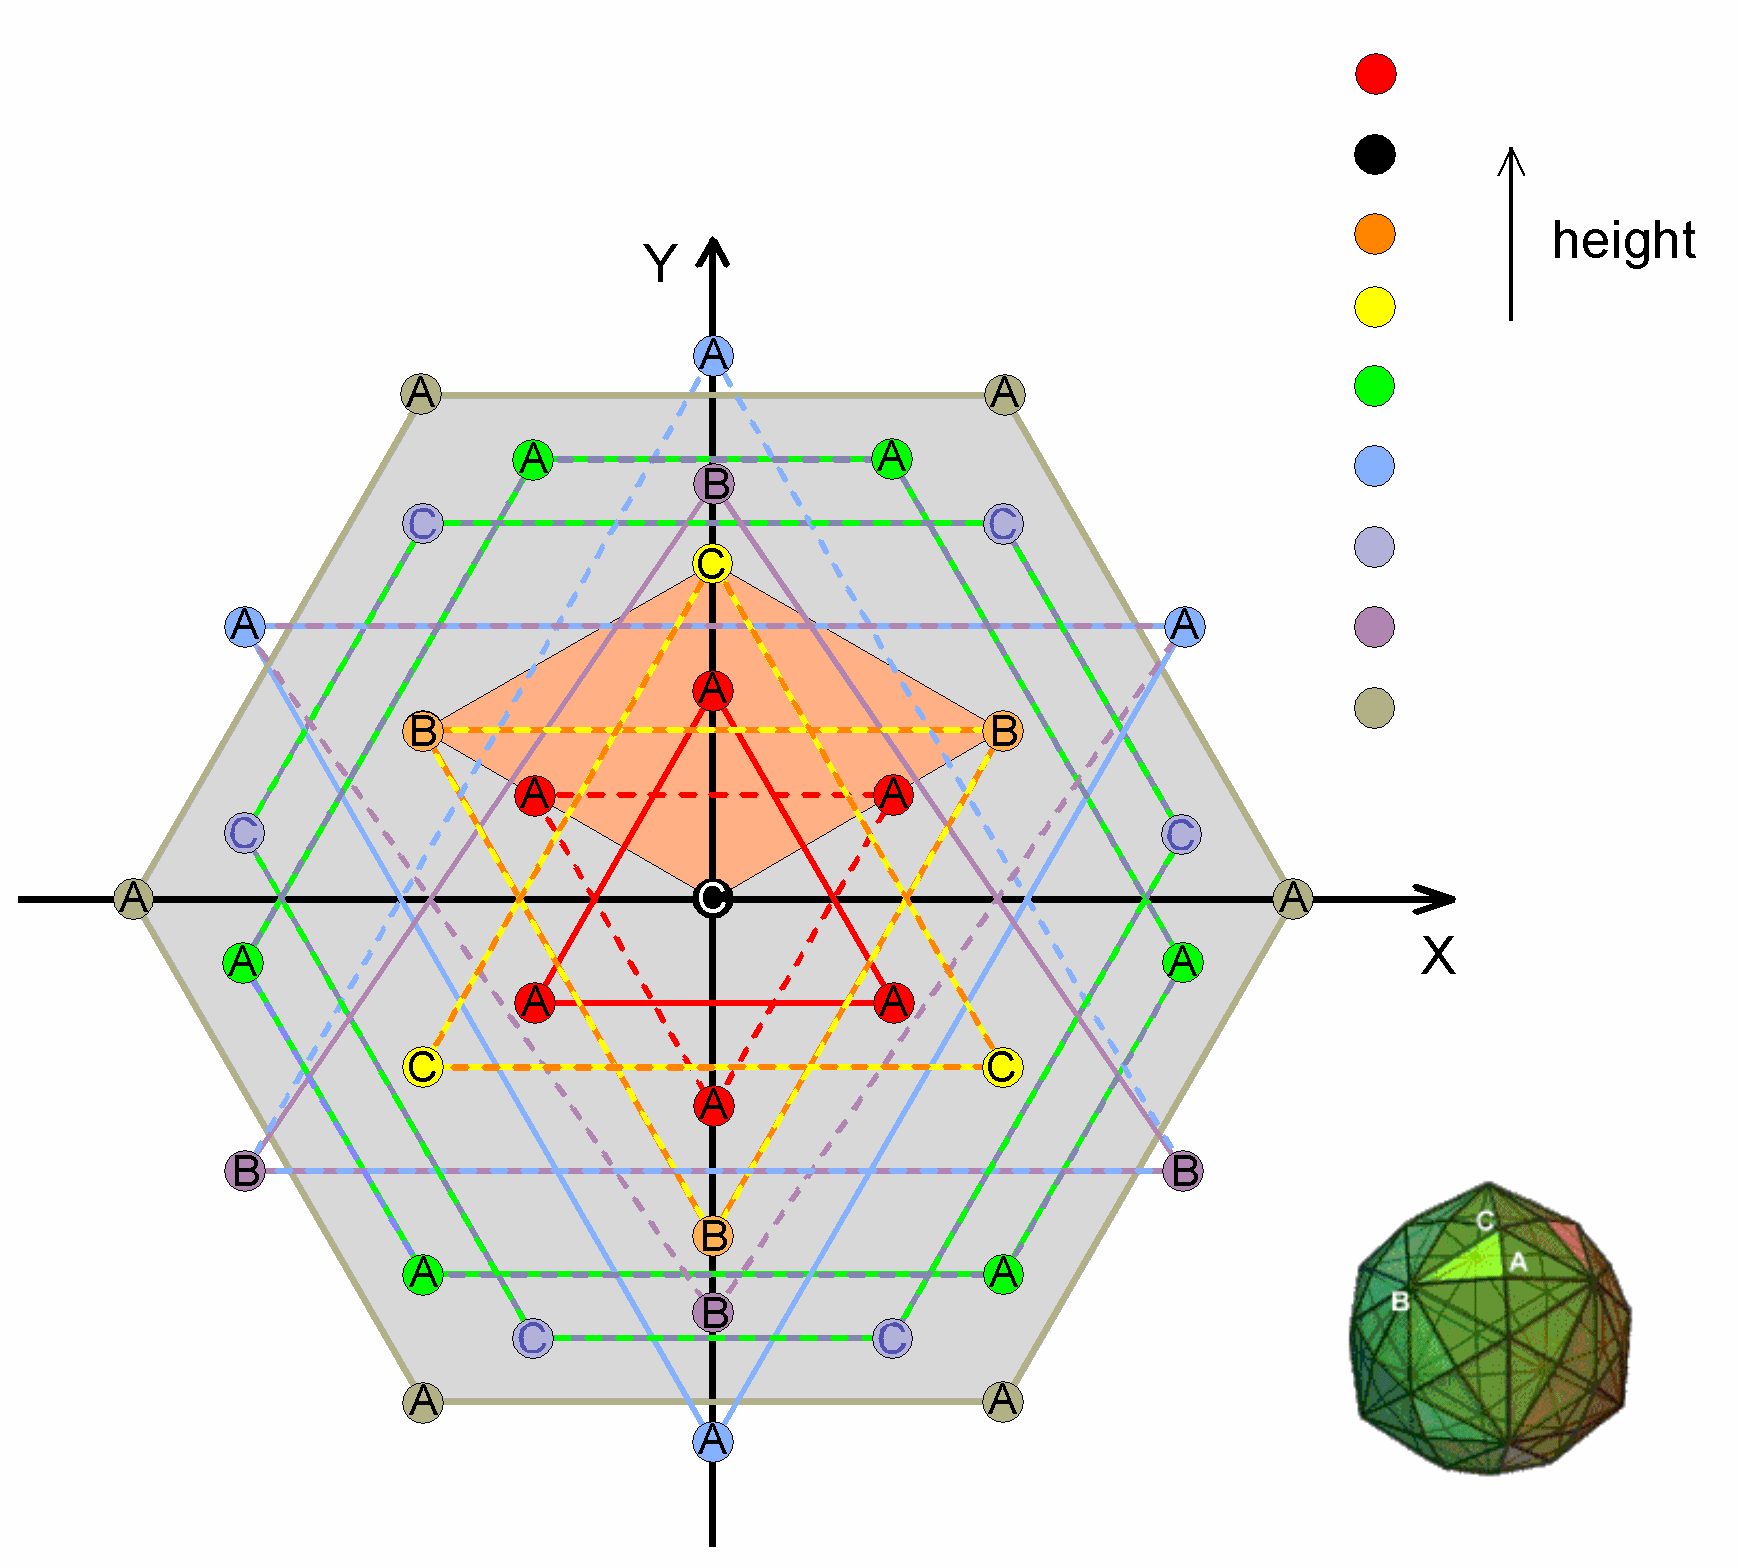 15 layers of vertices in disdyakis triacontahedron